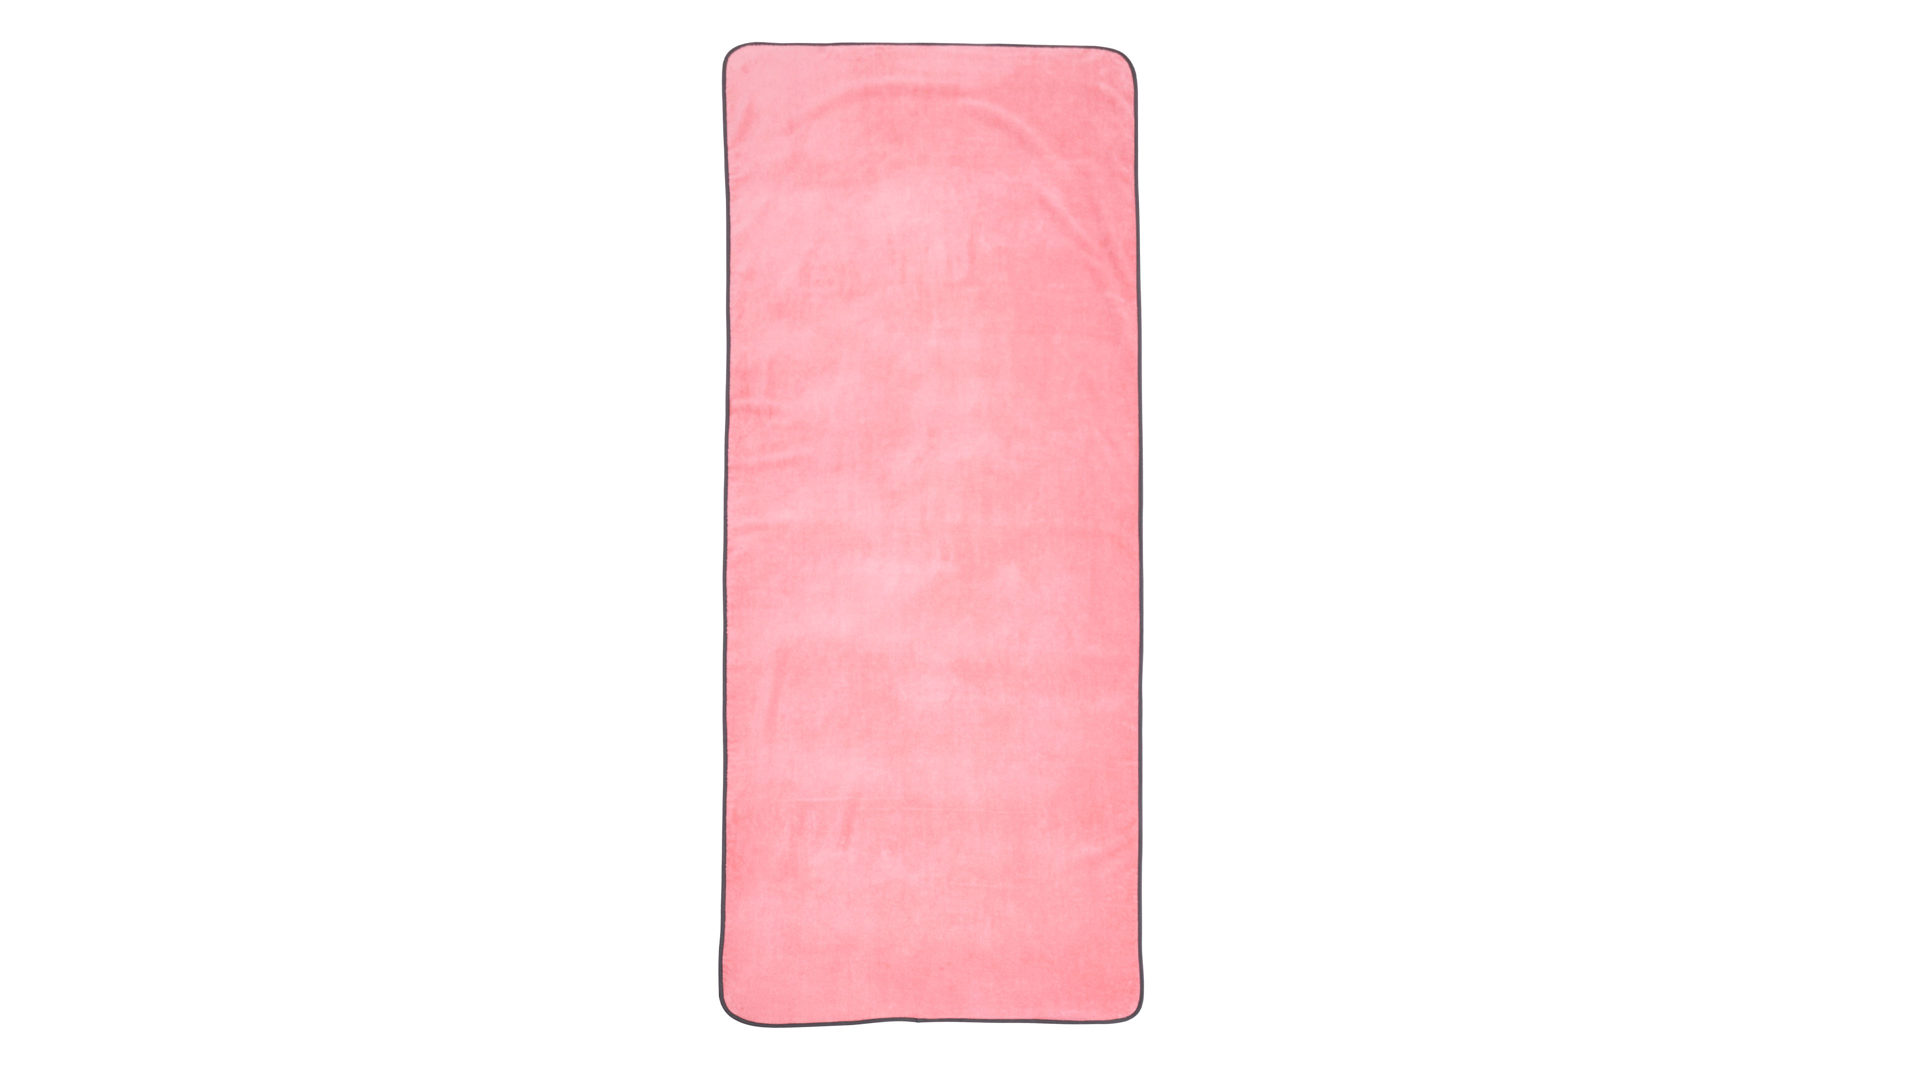 Saunahandtuch Done® by karabel home company aus Stoff in Pink DONE® Saunatuch blossomfarbene Baumwolle – ca. 80 x 200 cm